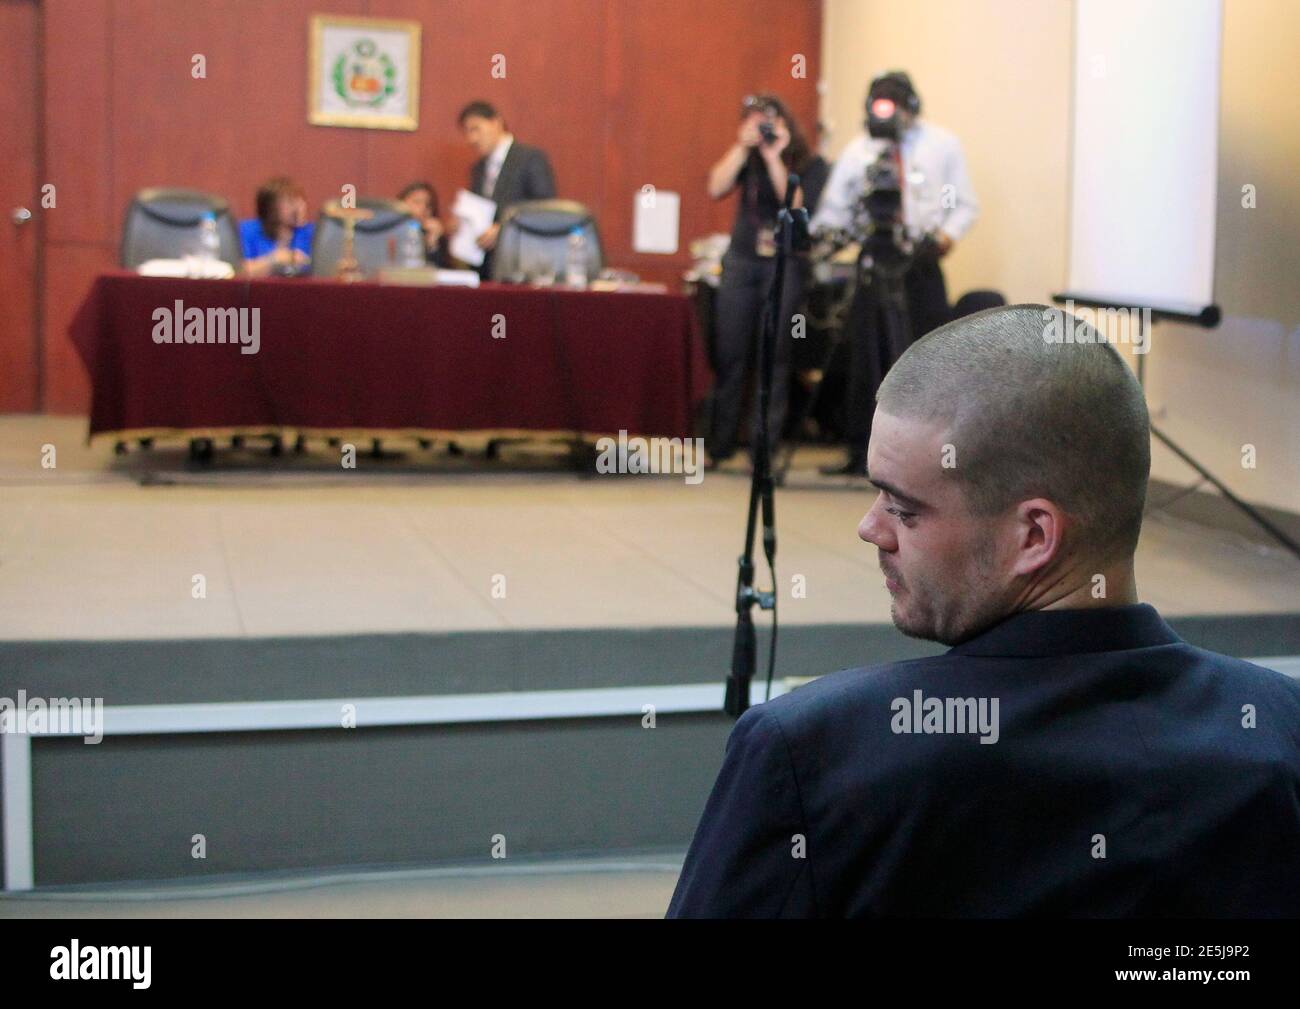 Dutch citizen Joran Van der Sloot awaits his trial in Lima January 6, 2012. Van der Sloot went on trial on Friday for killing Stephany Flores in 2010, five years to the day after a U.S. teenager vanished on the island of Aruba after spending time with him.   REUTERS/Pilar Olivares (PERU - Tags: CRIME LAW) Stock Photo